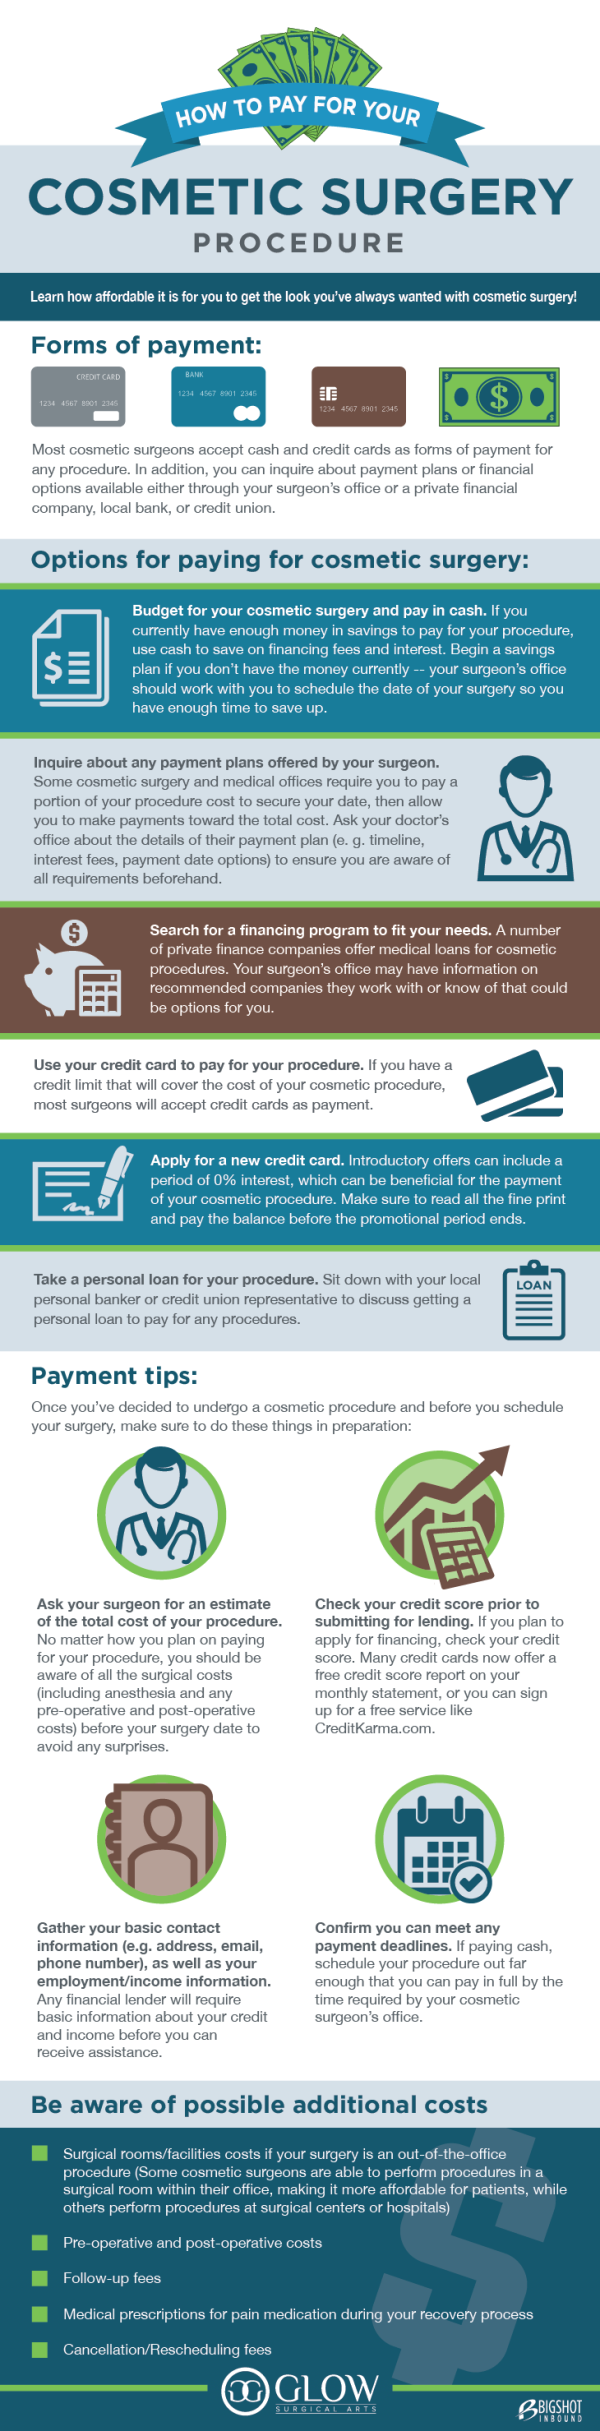 How to pay for your cosmetic surgery procedure